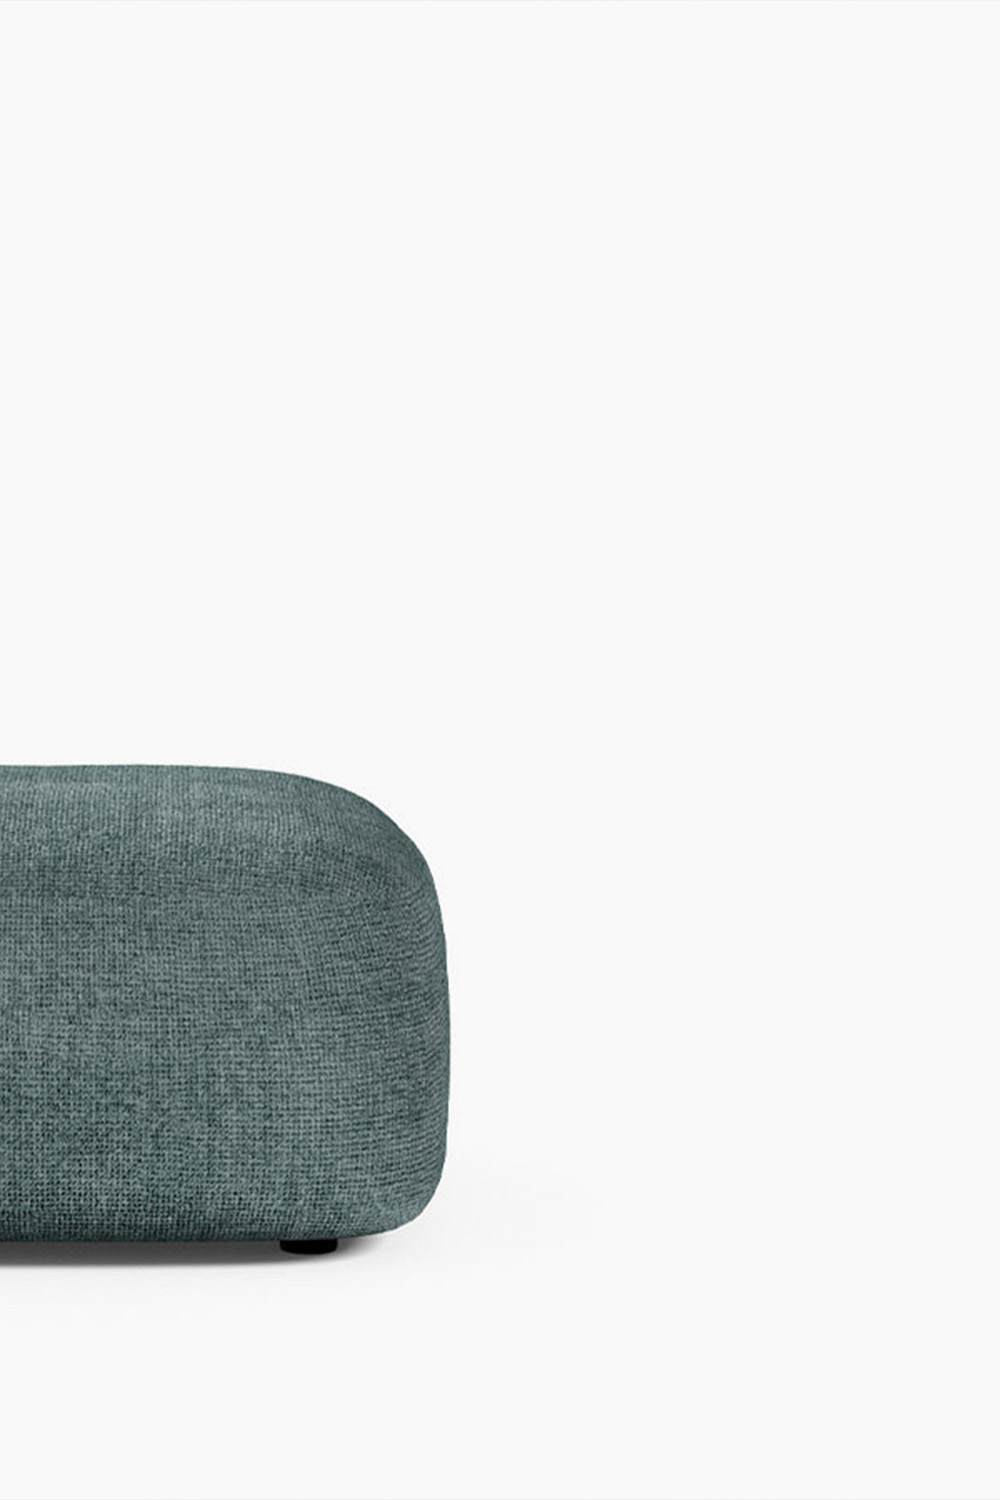 Rounded contemporary luxury ottoman / floor cushion by Novamobili. Sold by Krieder UK.